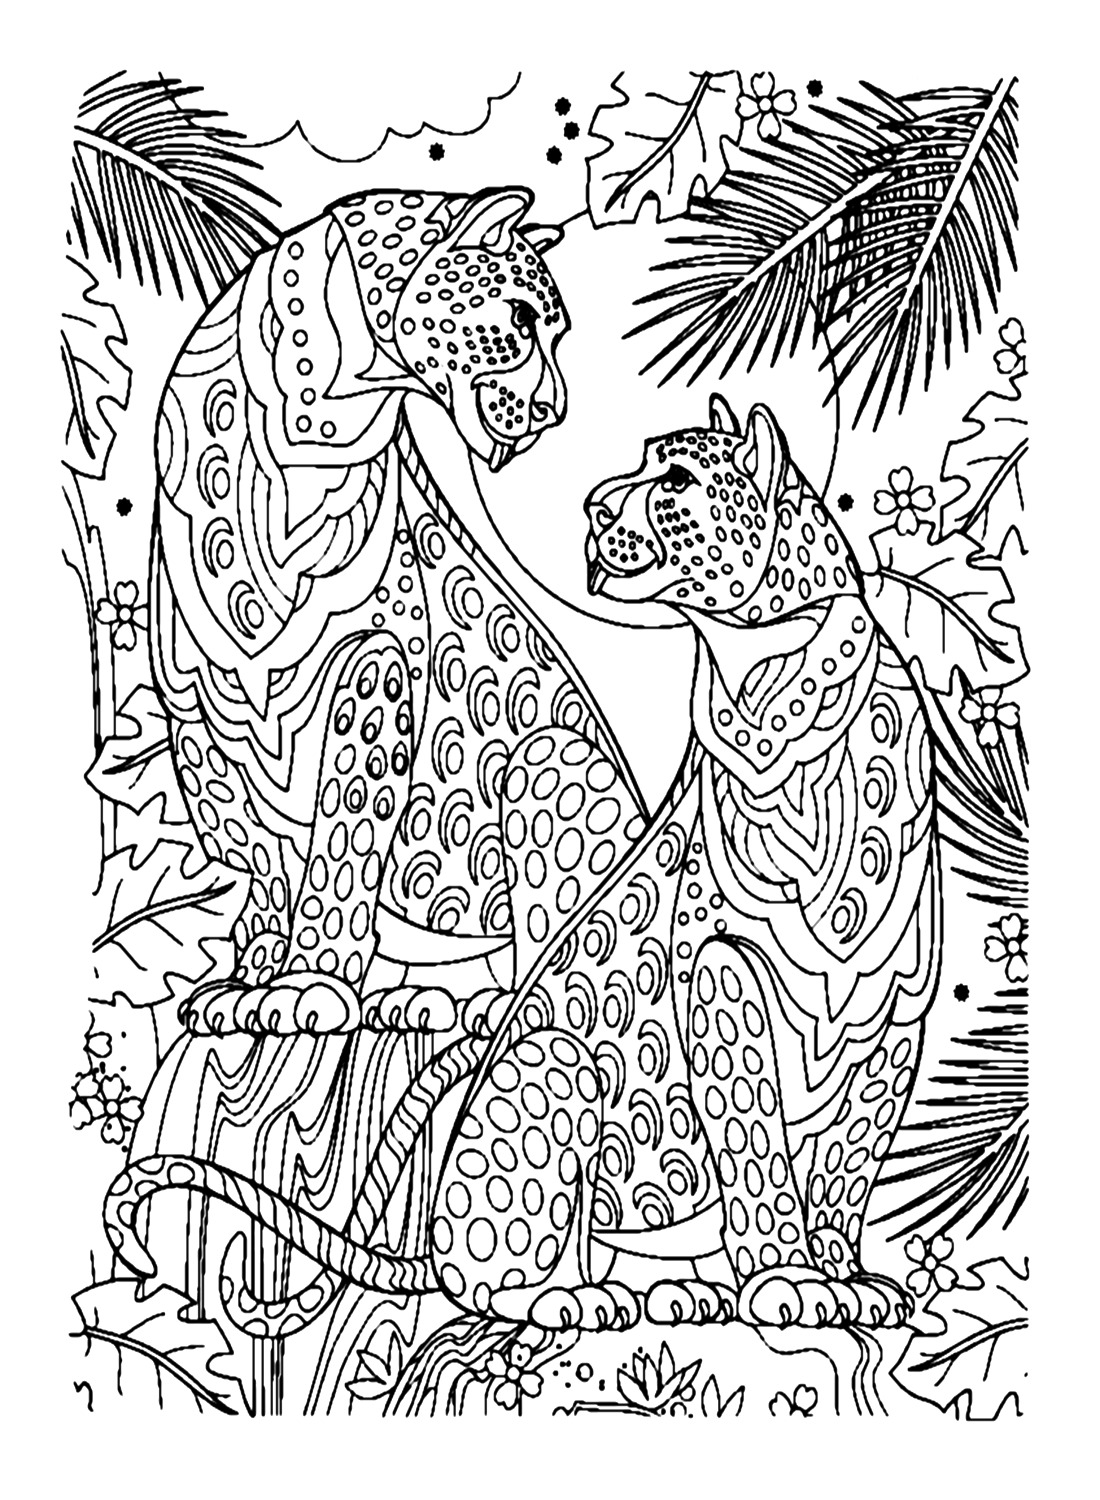 Two Leopards In The Jungle Coloring Page - Free Printable Coloring Pages